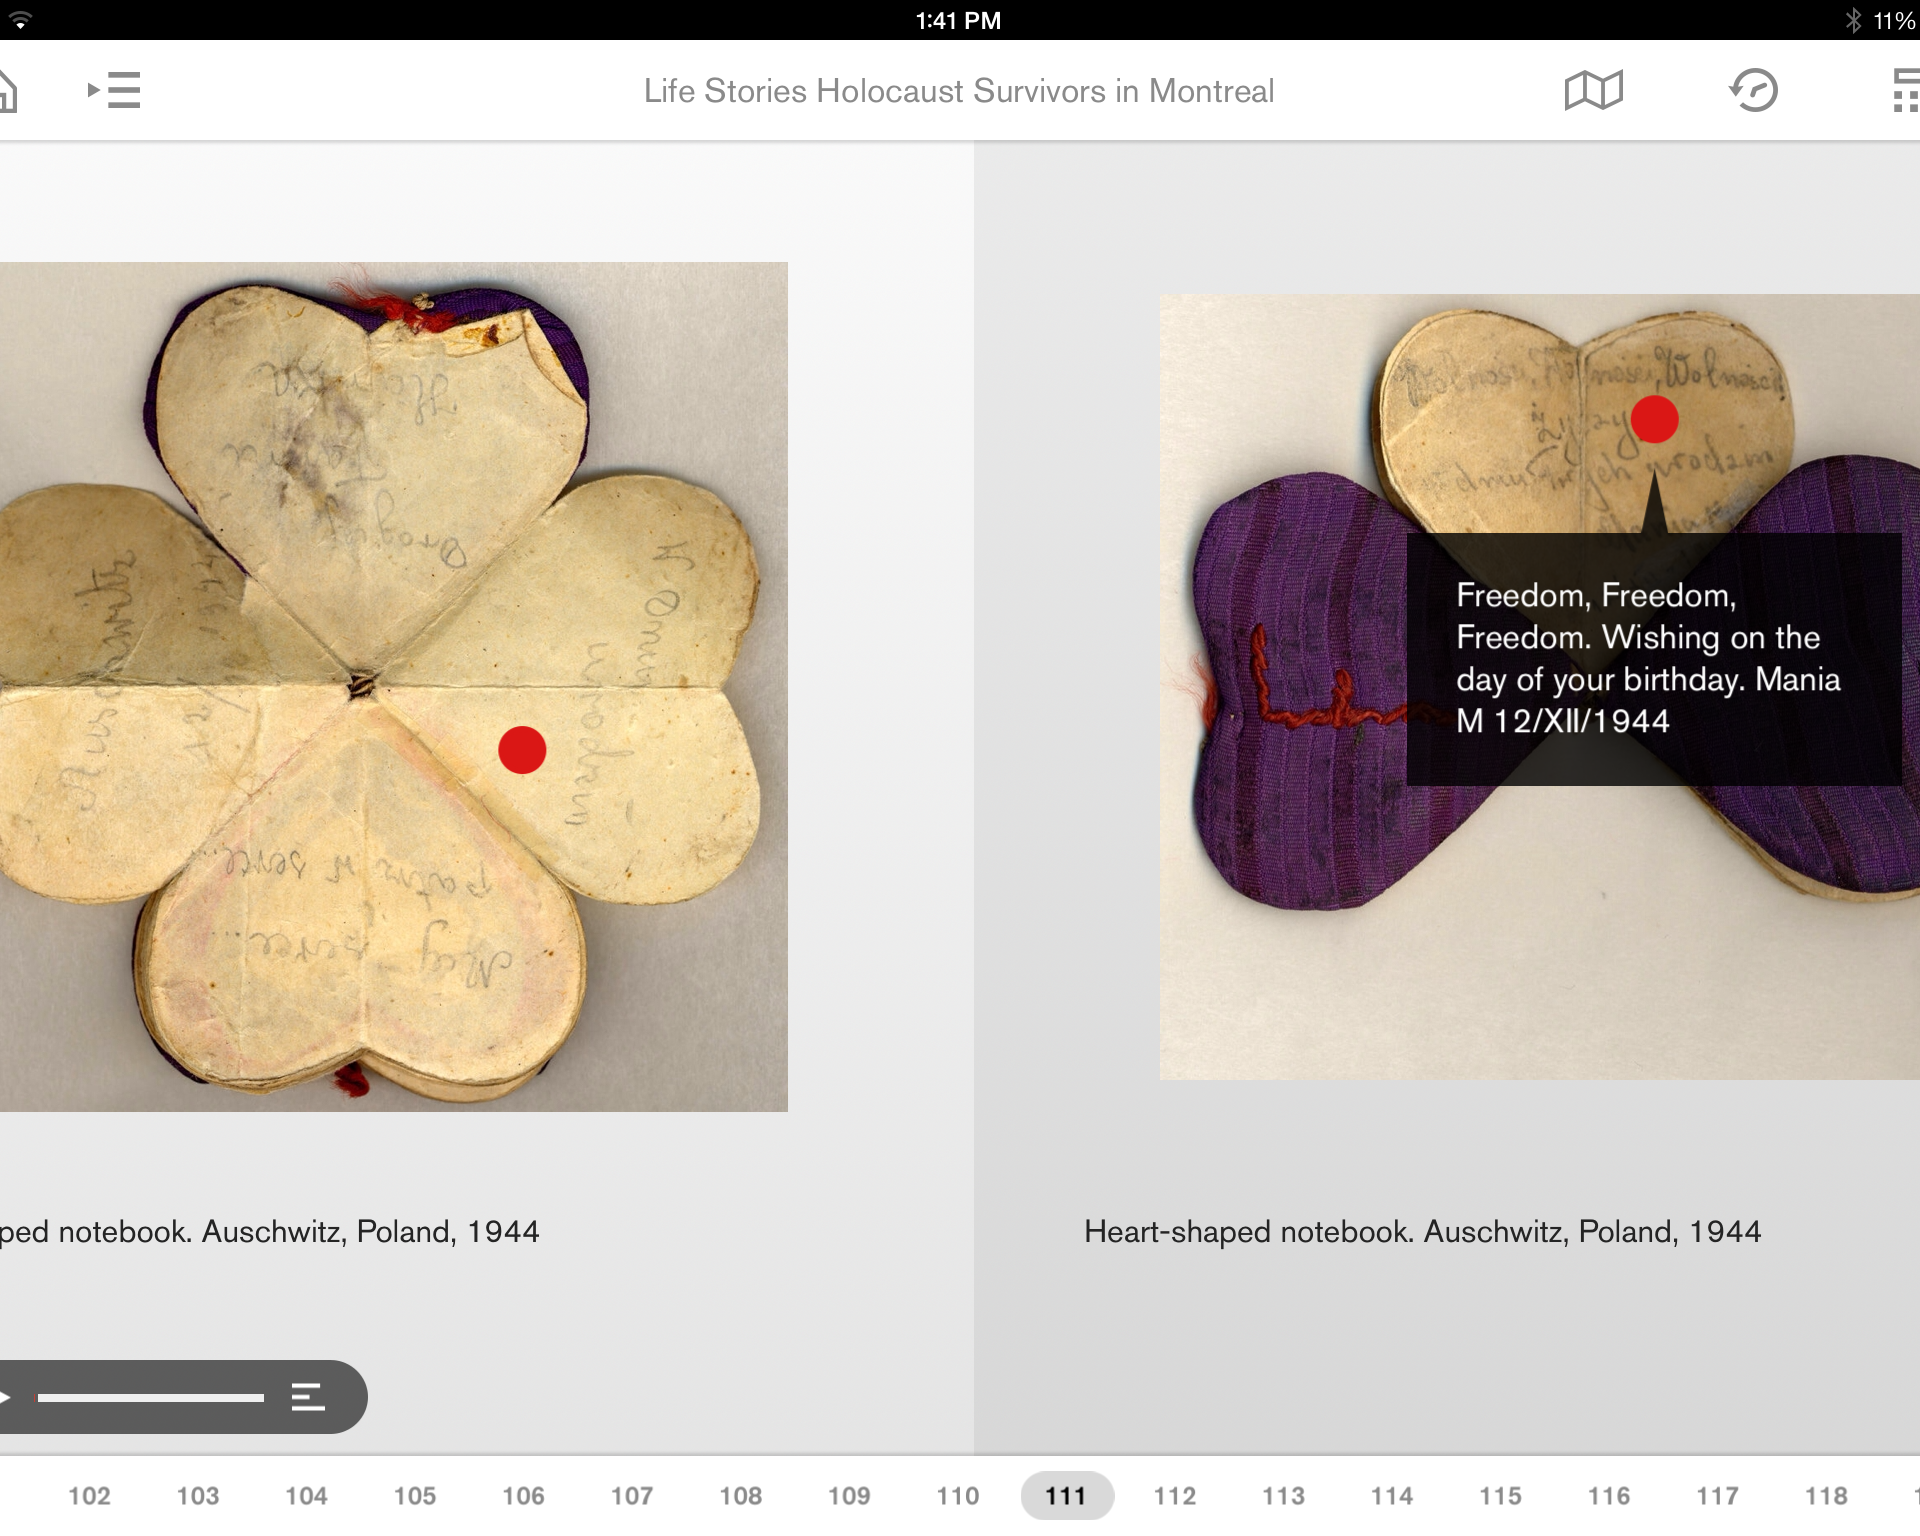 Discover more about artefacts with the Montreal Holocaust Museum's app.